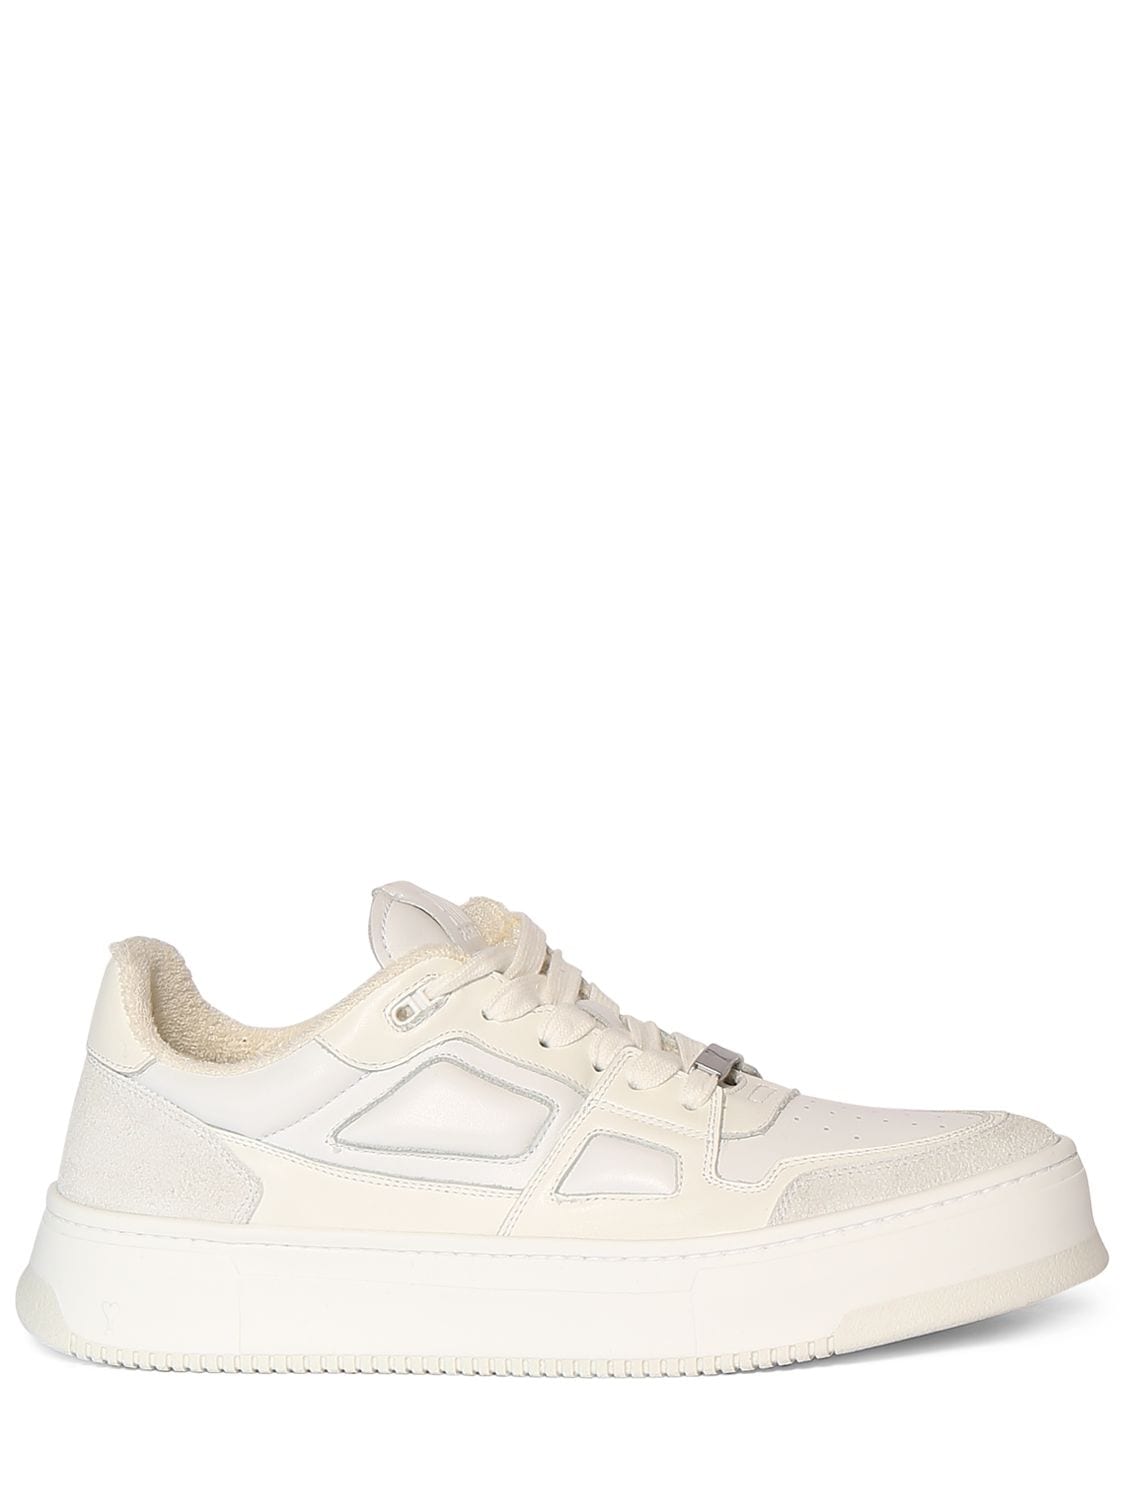 Shop Ami Alexandre Mattiussi New Arcade Low Top Sneakers In Off White